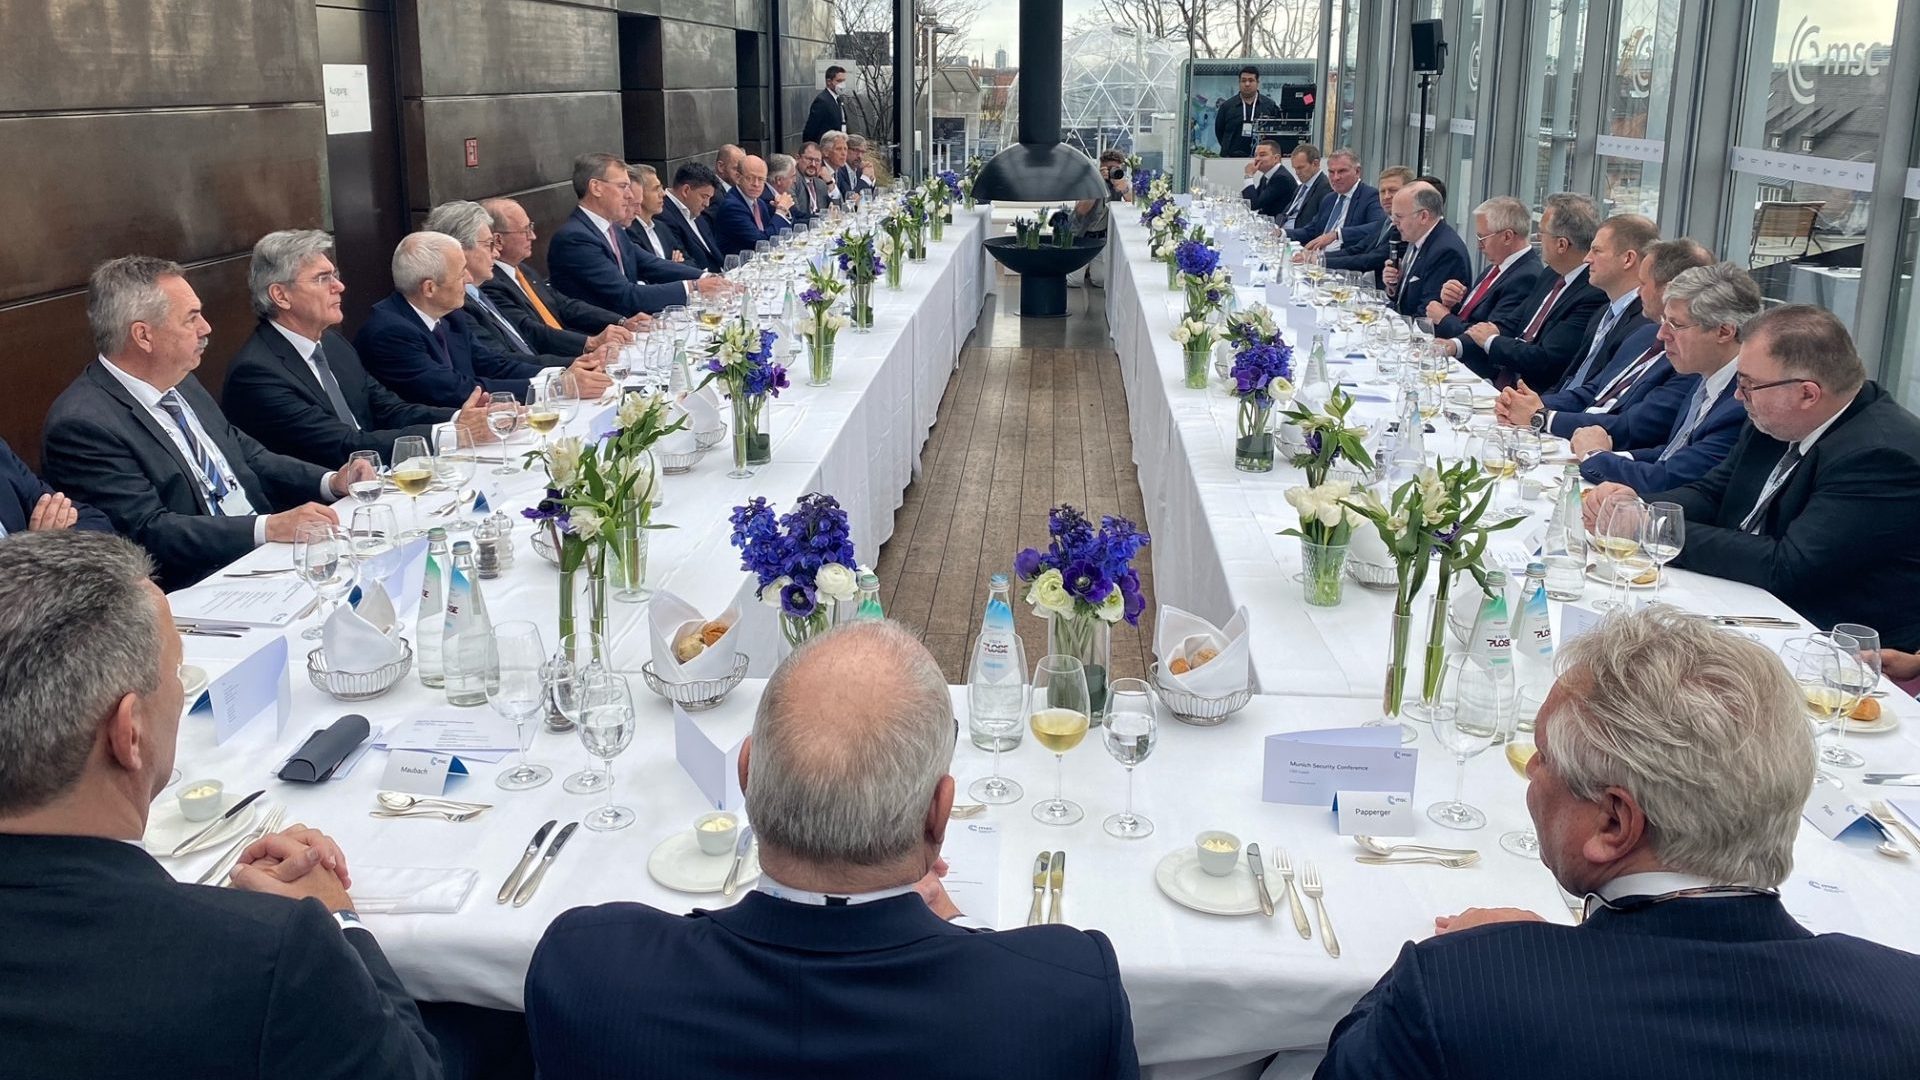 The controversial picture showing a large table with roughly 30 business leaders and security experts. Photo: © Michael Bröcker